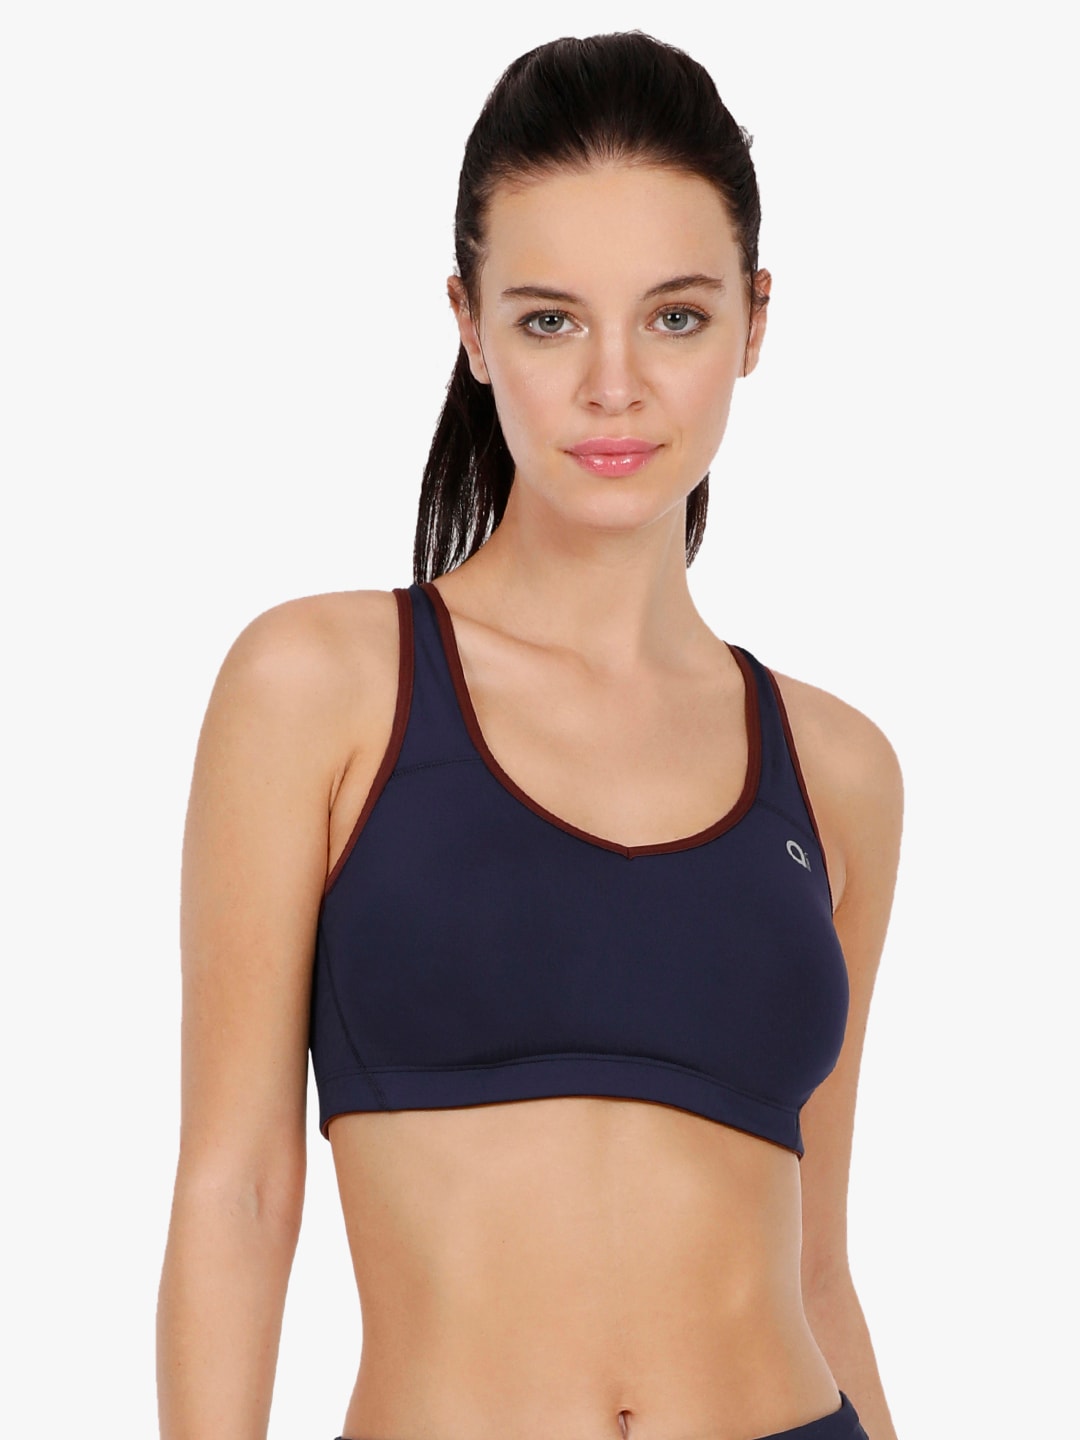 Amante Navy Blue Solid Non-Wired Lightly Padded Sports Bra ABR17117 Price in India